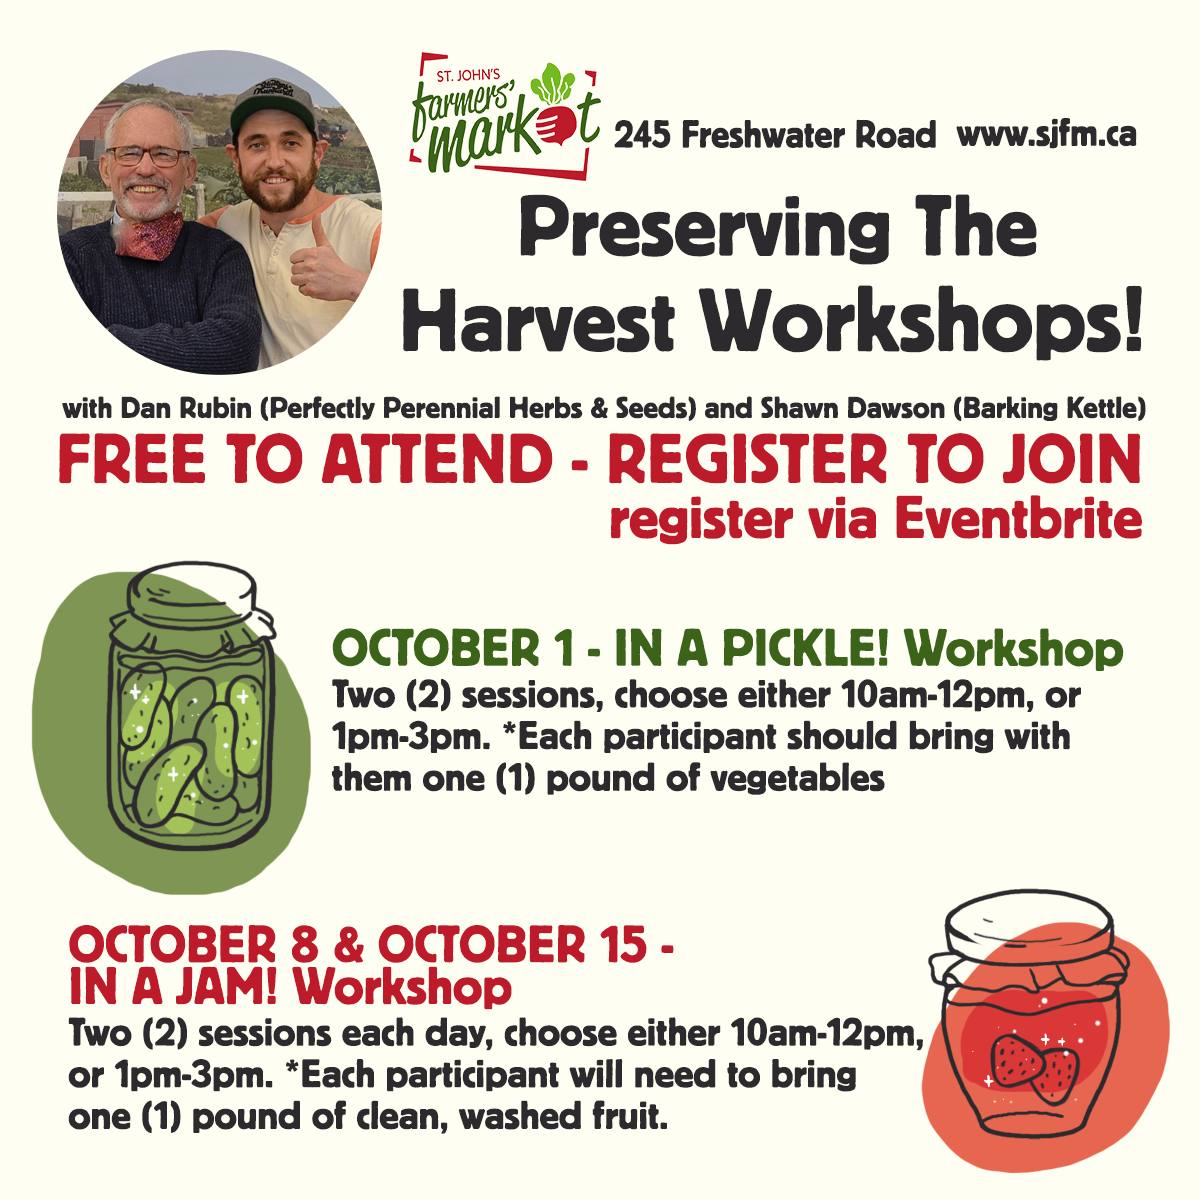 In a Pickle! - A Pickling Workshop at the St. John's Farmers' Market